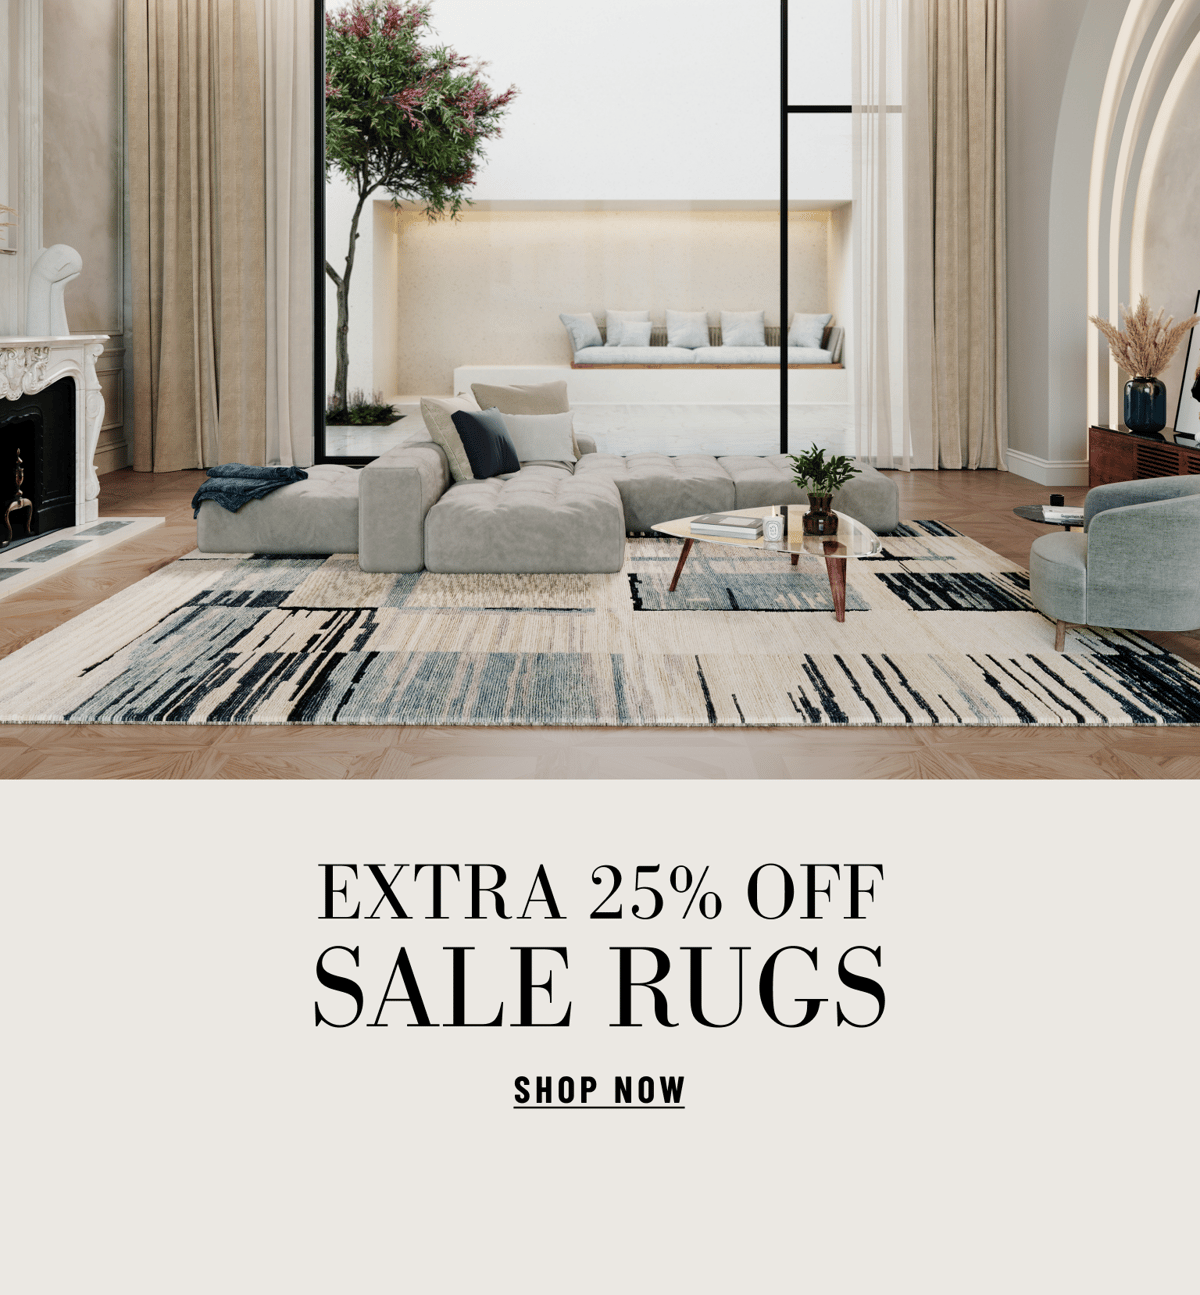  EXTRA 25% OFF SALE RUGS SHOP NOW 